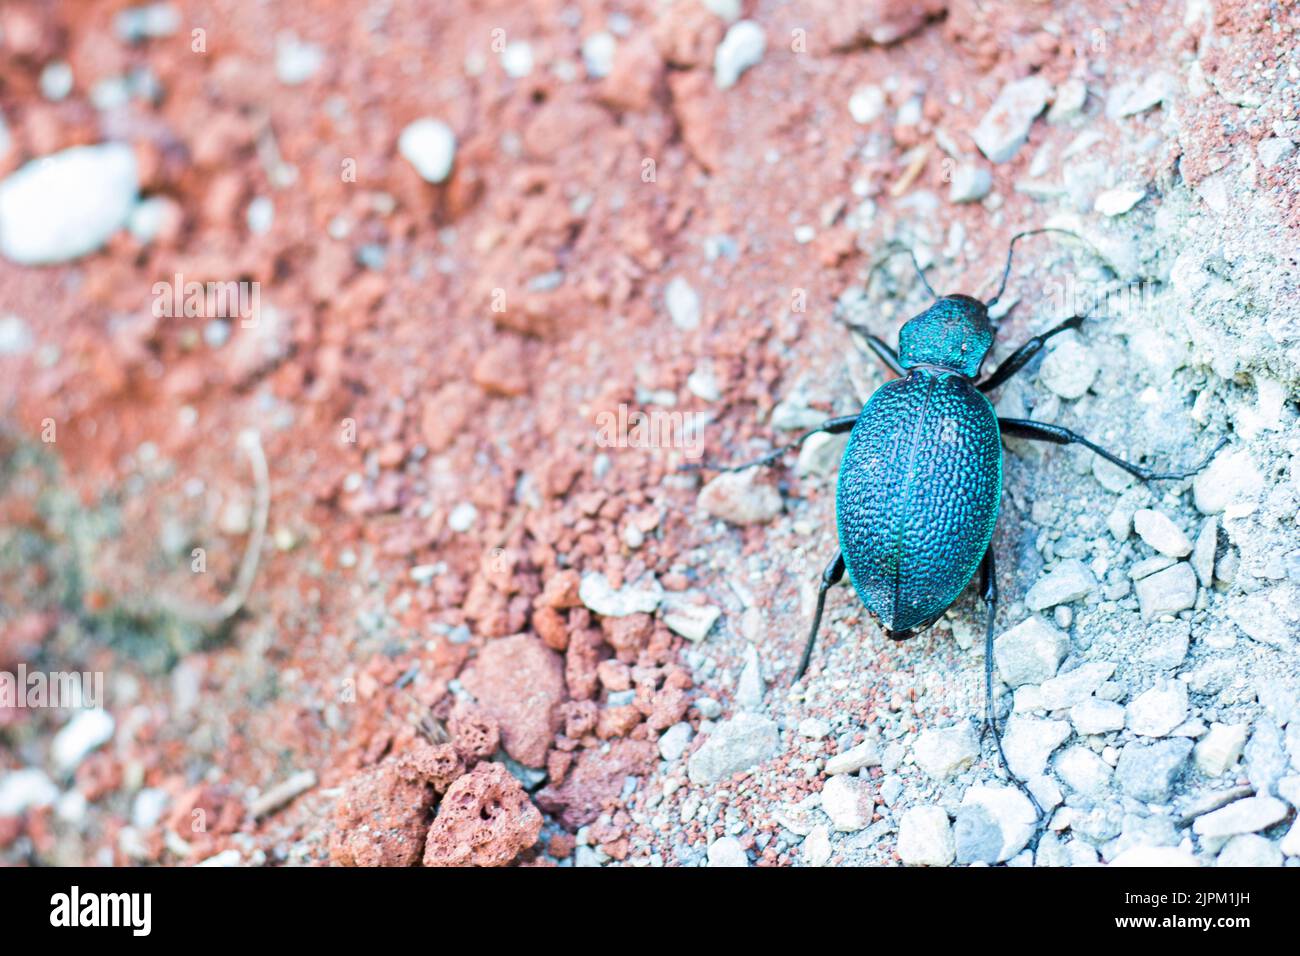 A macro shot of a Carabus scabrosus tauricus beetle on a dirt gravel ground Stock Photo